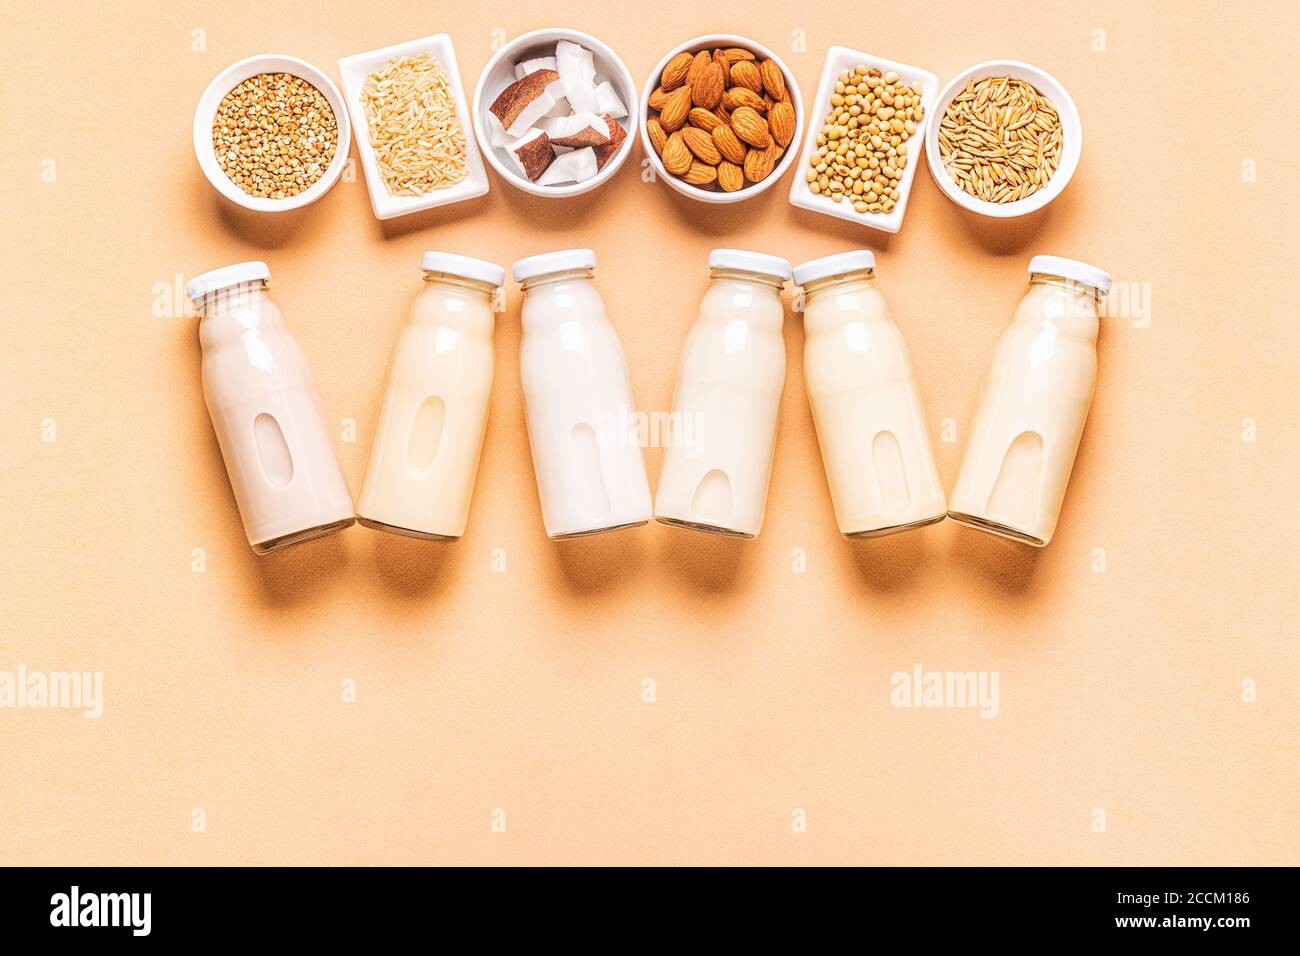 A bottles of alternative  milk and ingredients, top view. Stock Photo